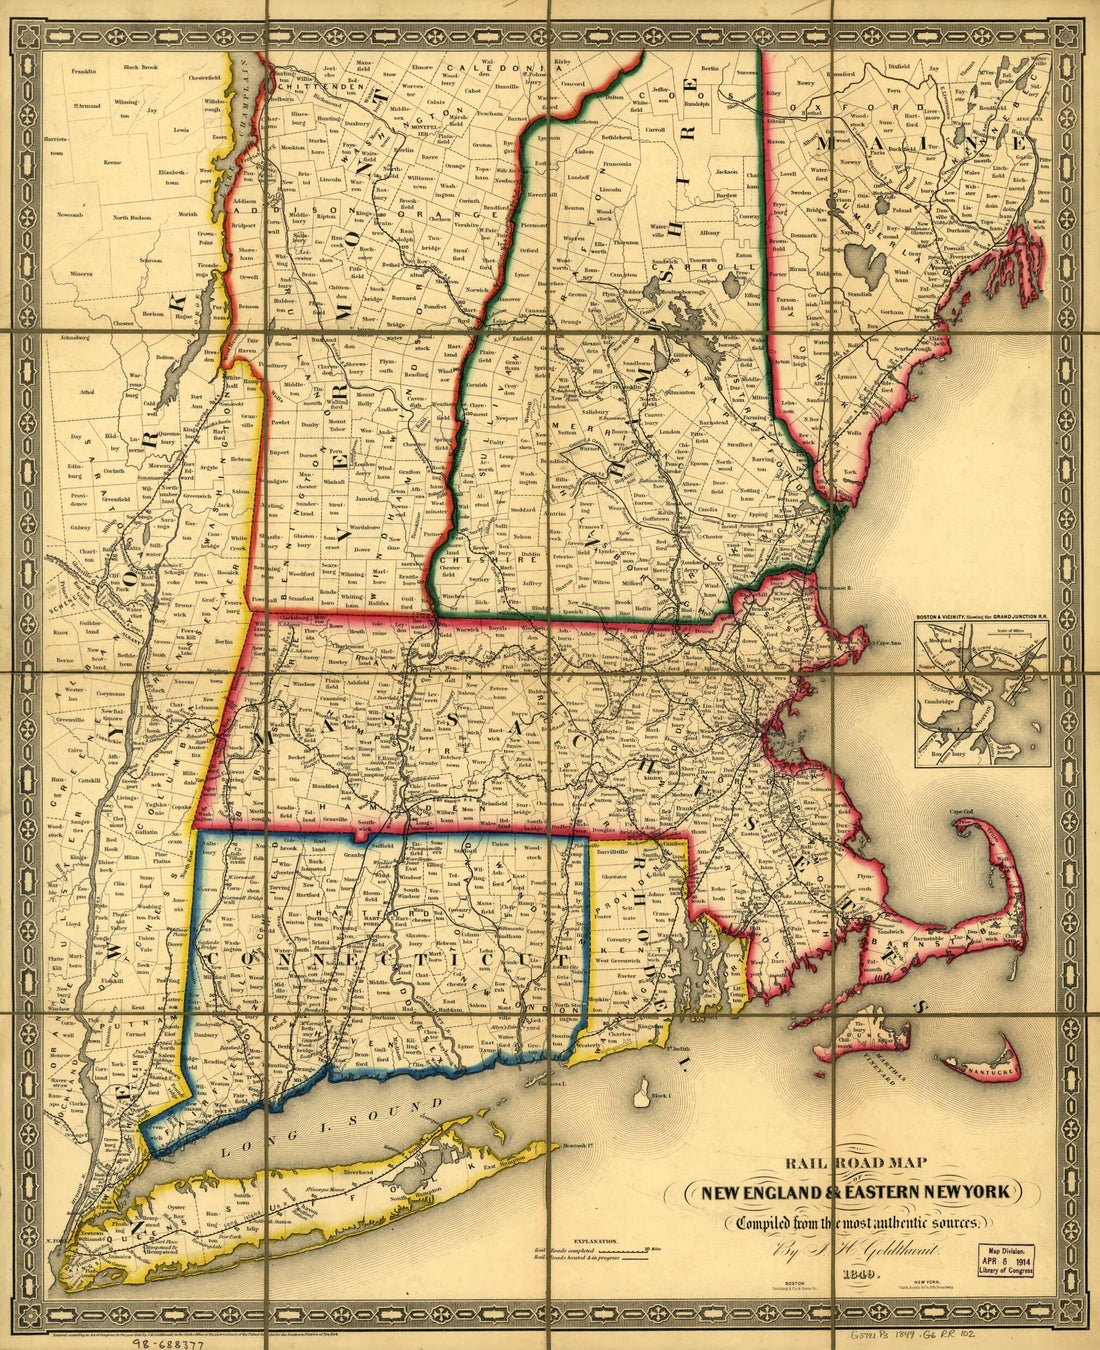 This old map of Railroad Map of New England &amp; Eastern New York Complied from the Most Authentic Sources from 1849 was created by J. H. Goldthwait in 1849